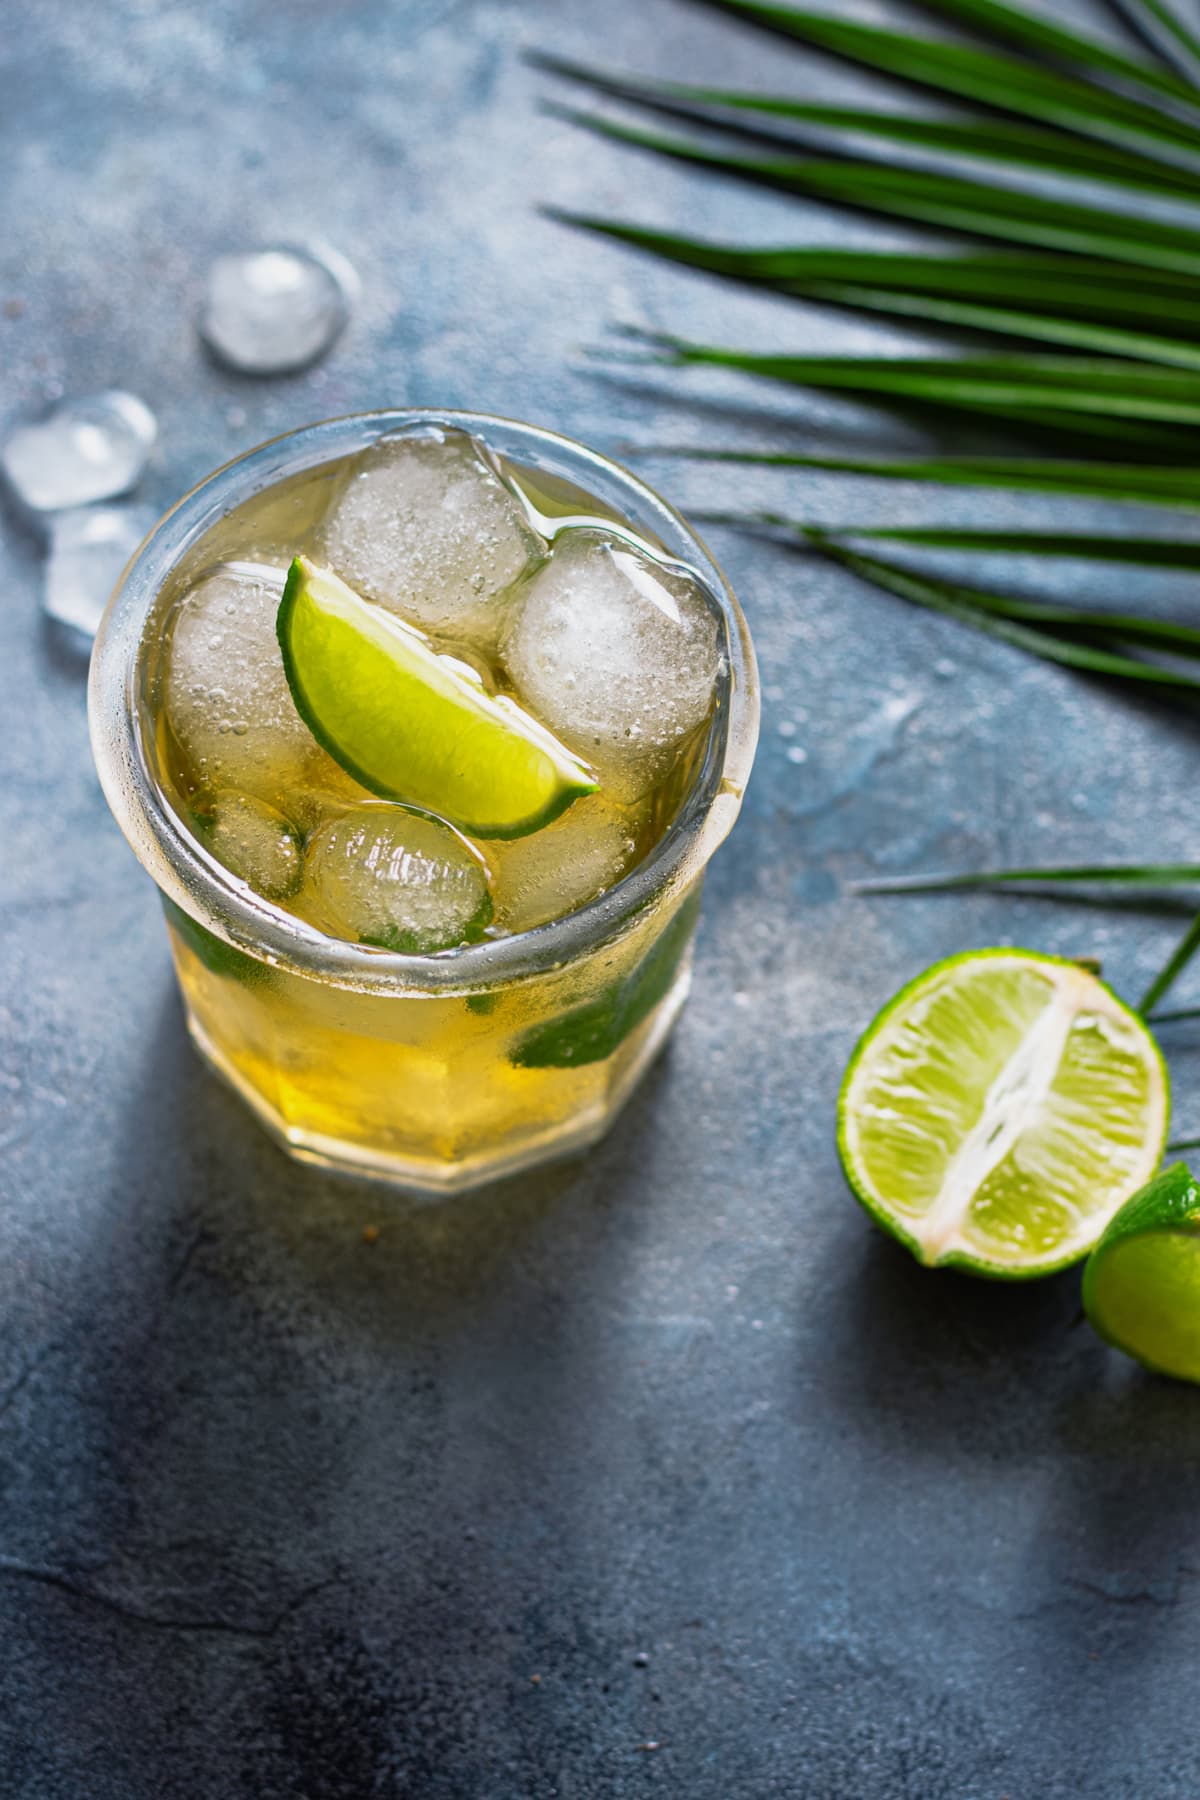 Green ice tea with ice cubes, lime, and mint leaves in the glass with palm leaves on gray stone background